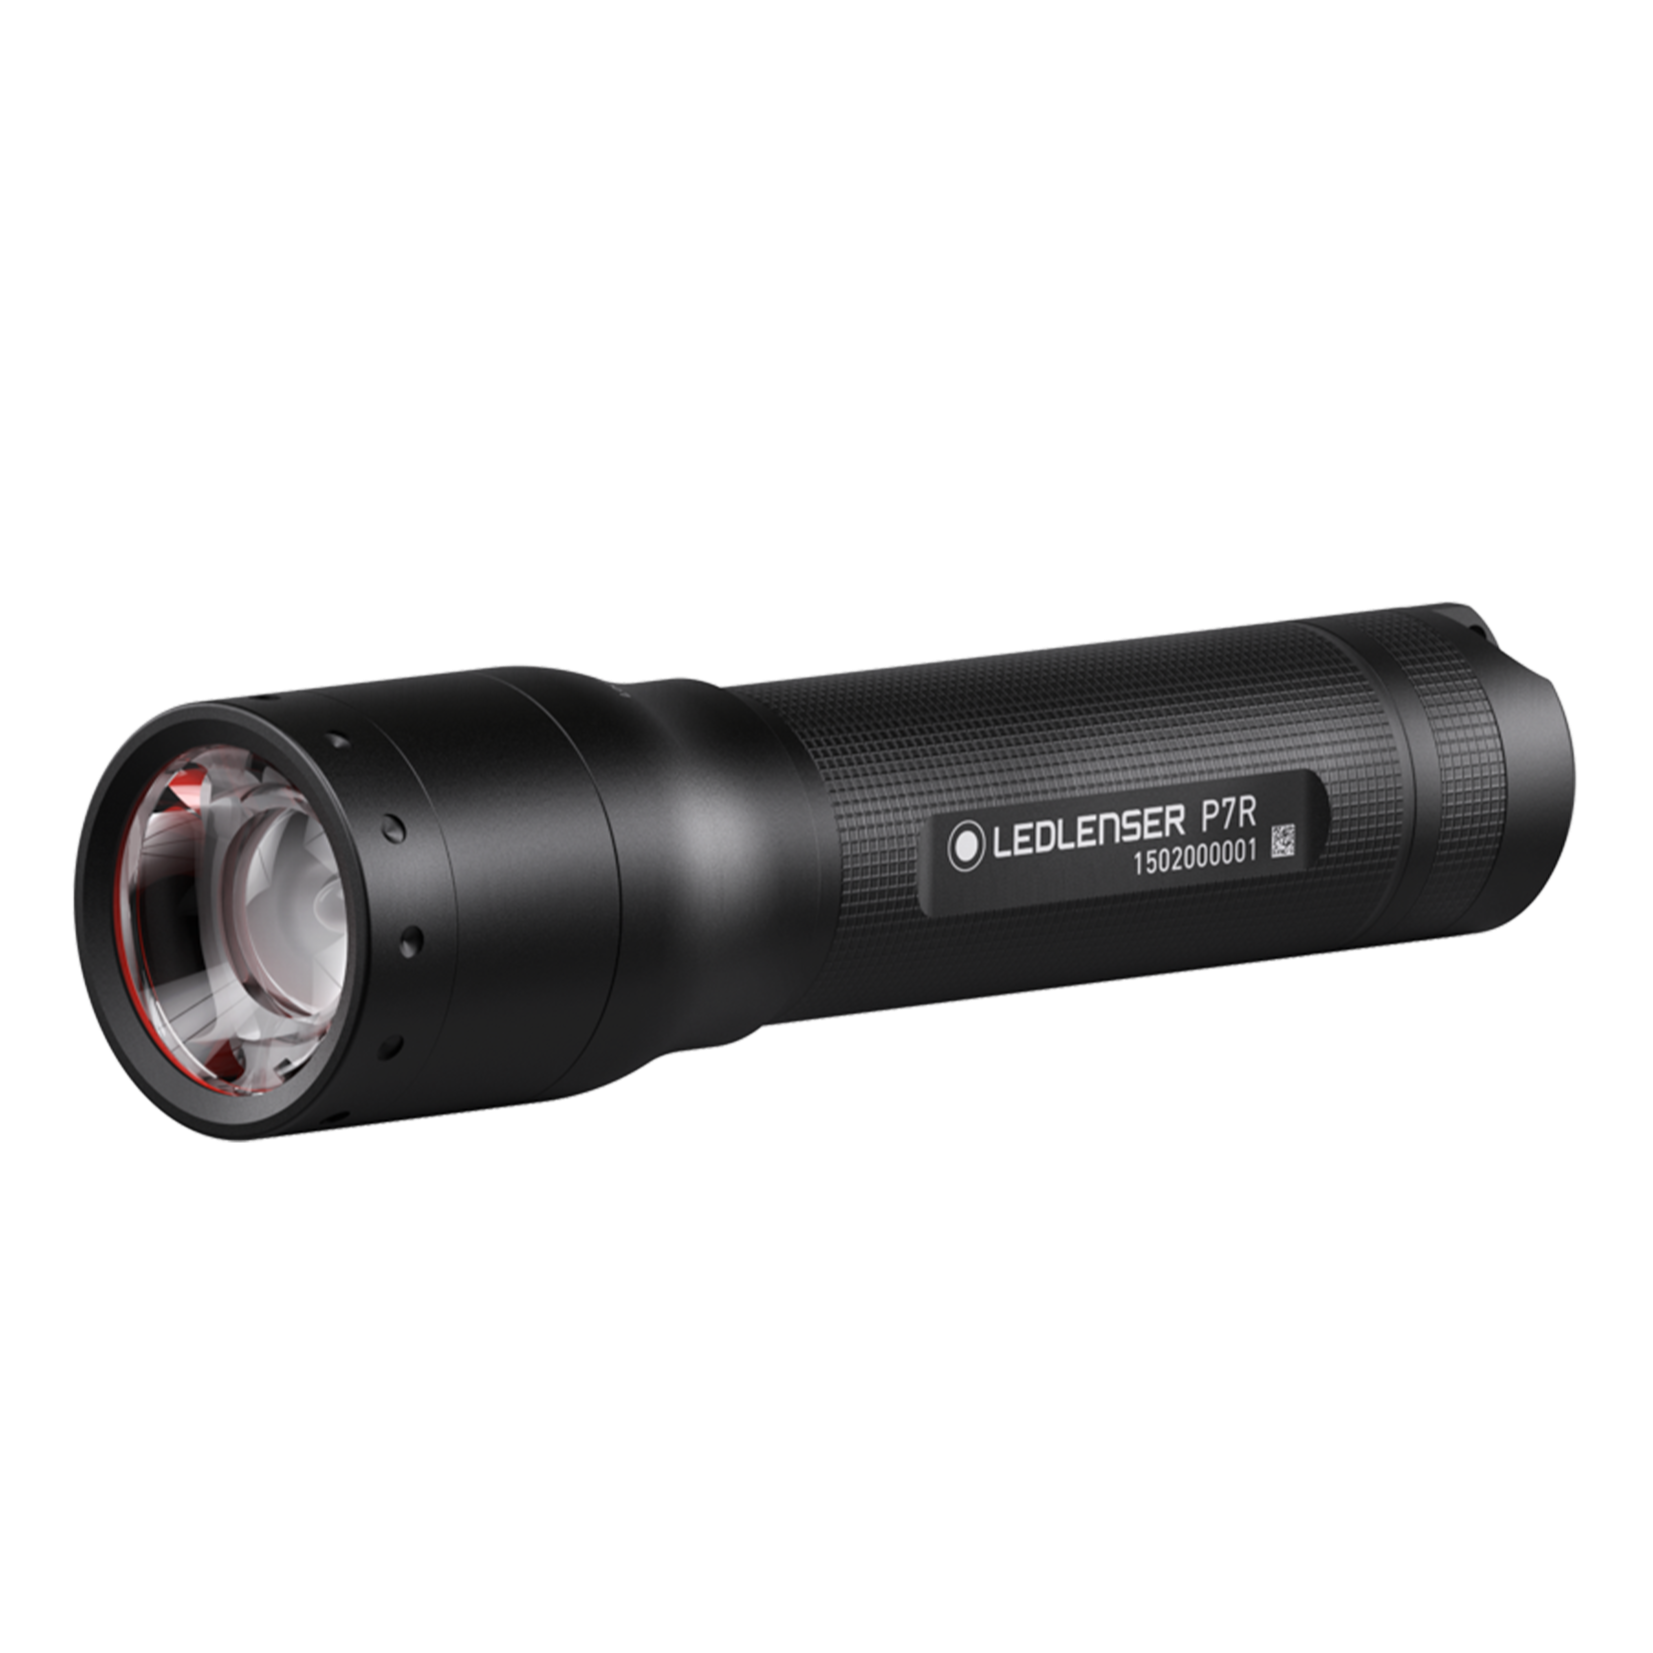 P7R Rechargeable Torch